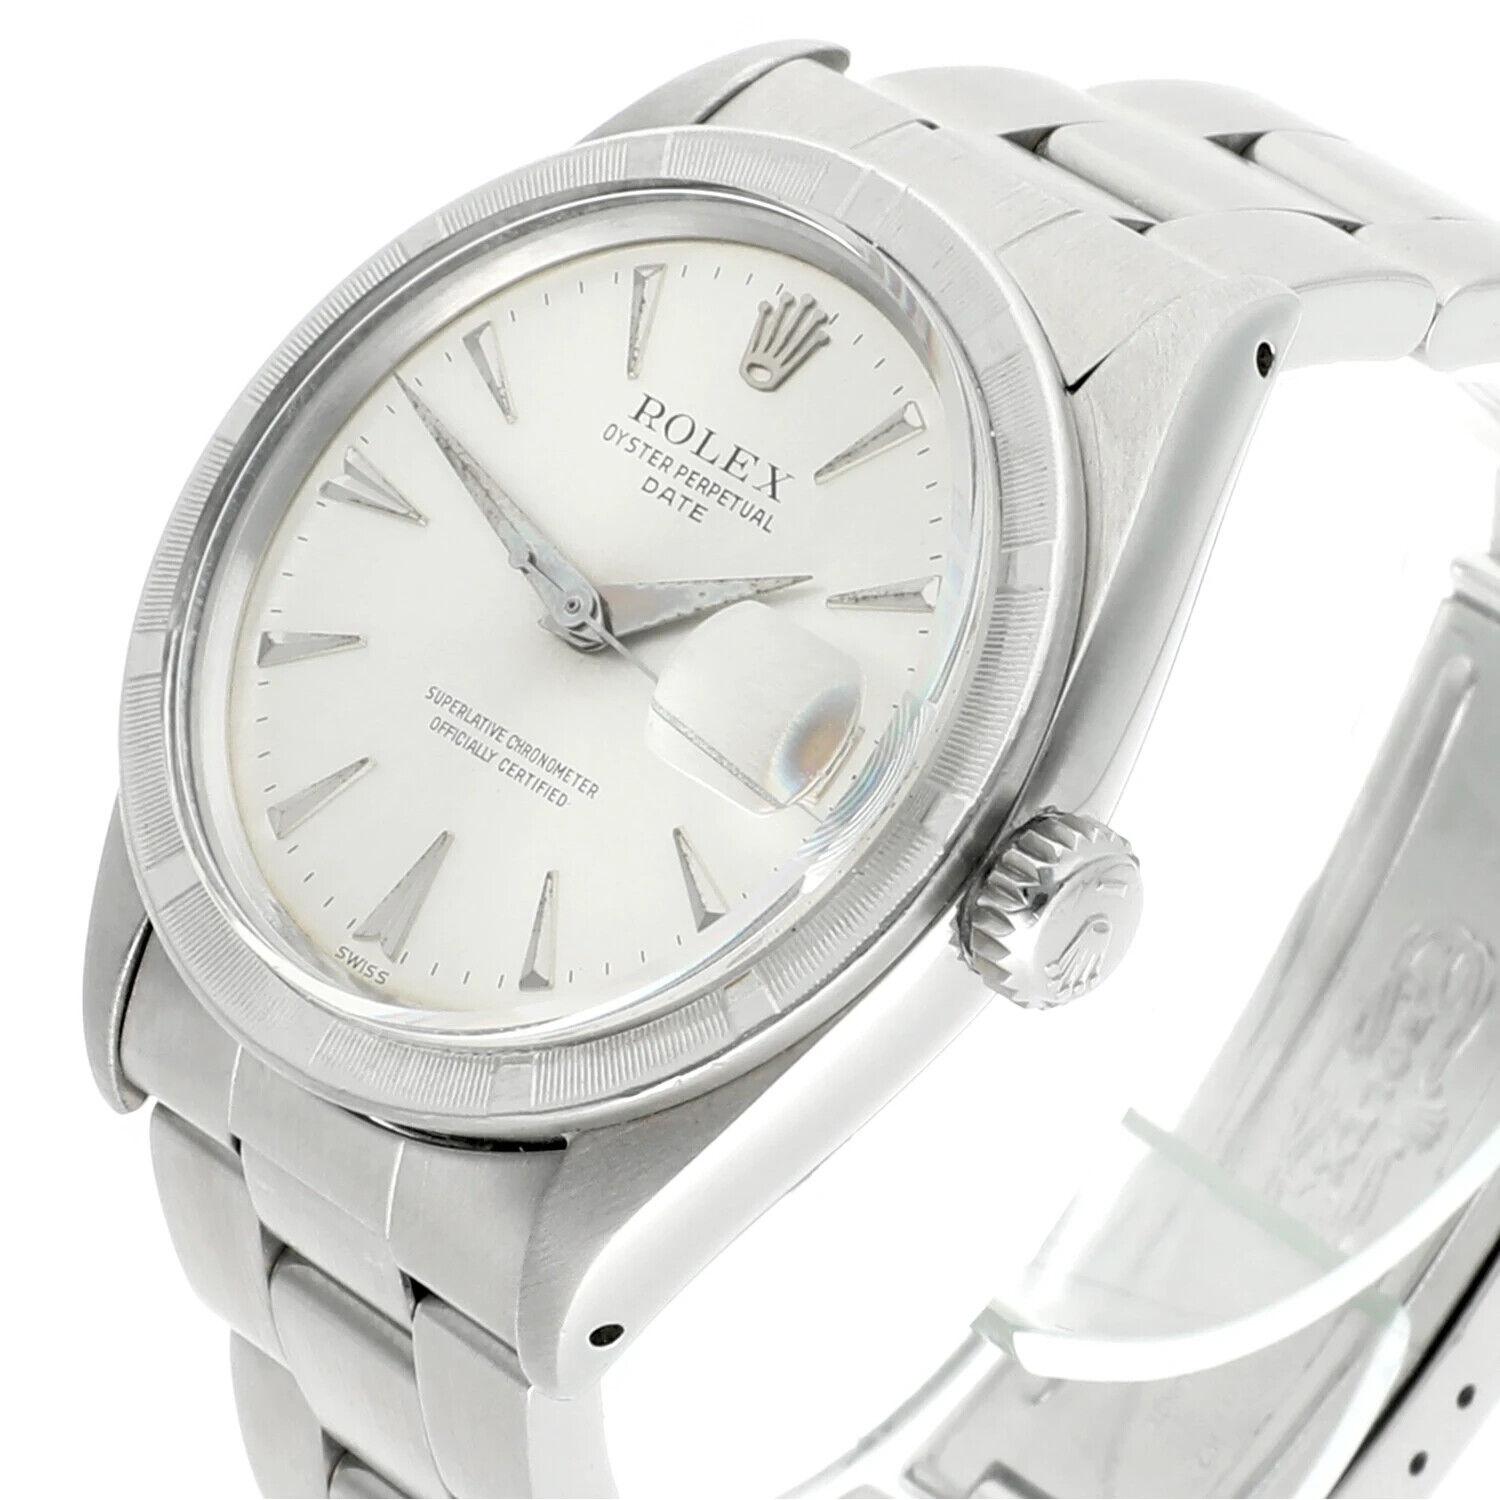 Rolex Date Stainless Steel Watch Silver Dial Oyster 1501, 1952 year. This watch has been professionally polished and is in perfect working condition. All parts are 100% Rolex.  This model features non-quick movement. Comes with a jewelry box and